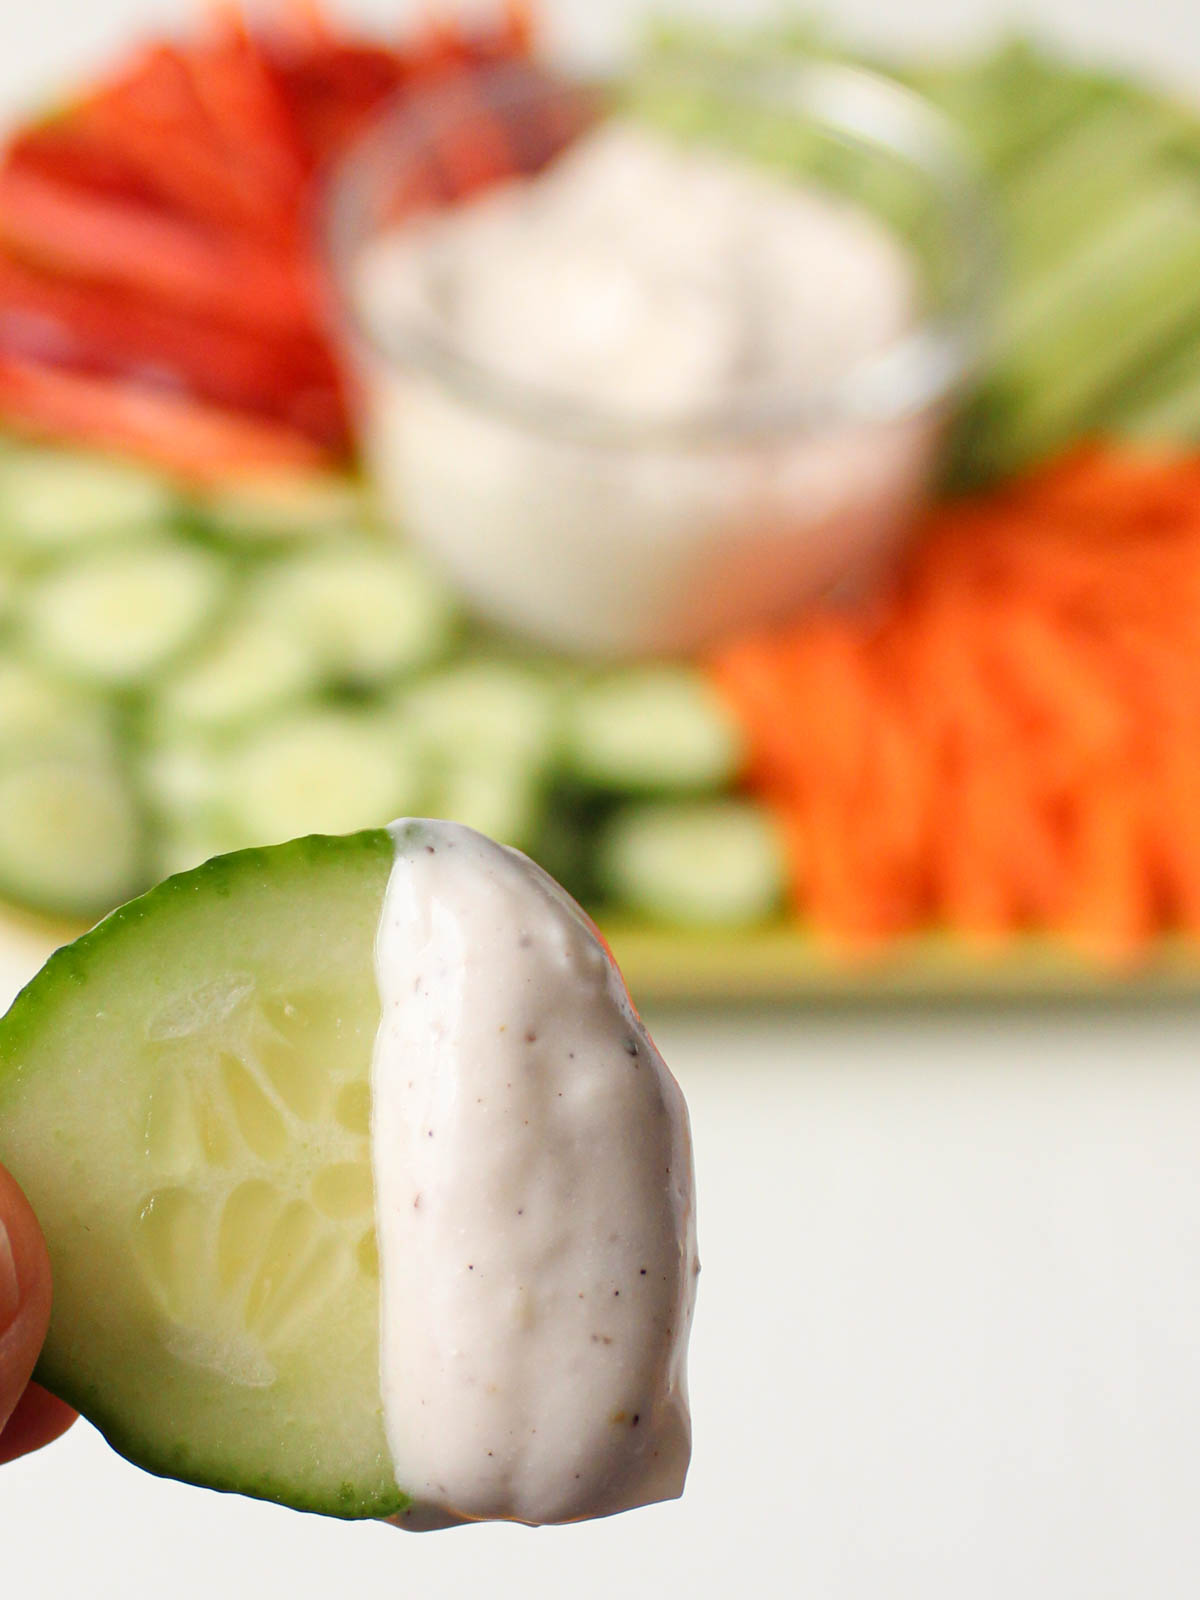 Cucumber slice with dip on it with vegetable platter in the background.